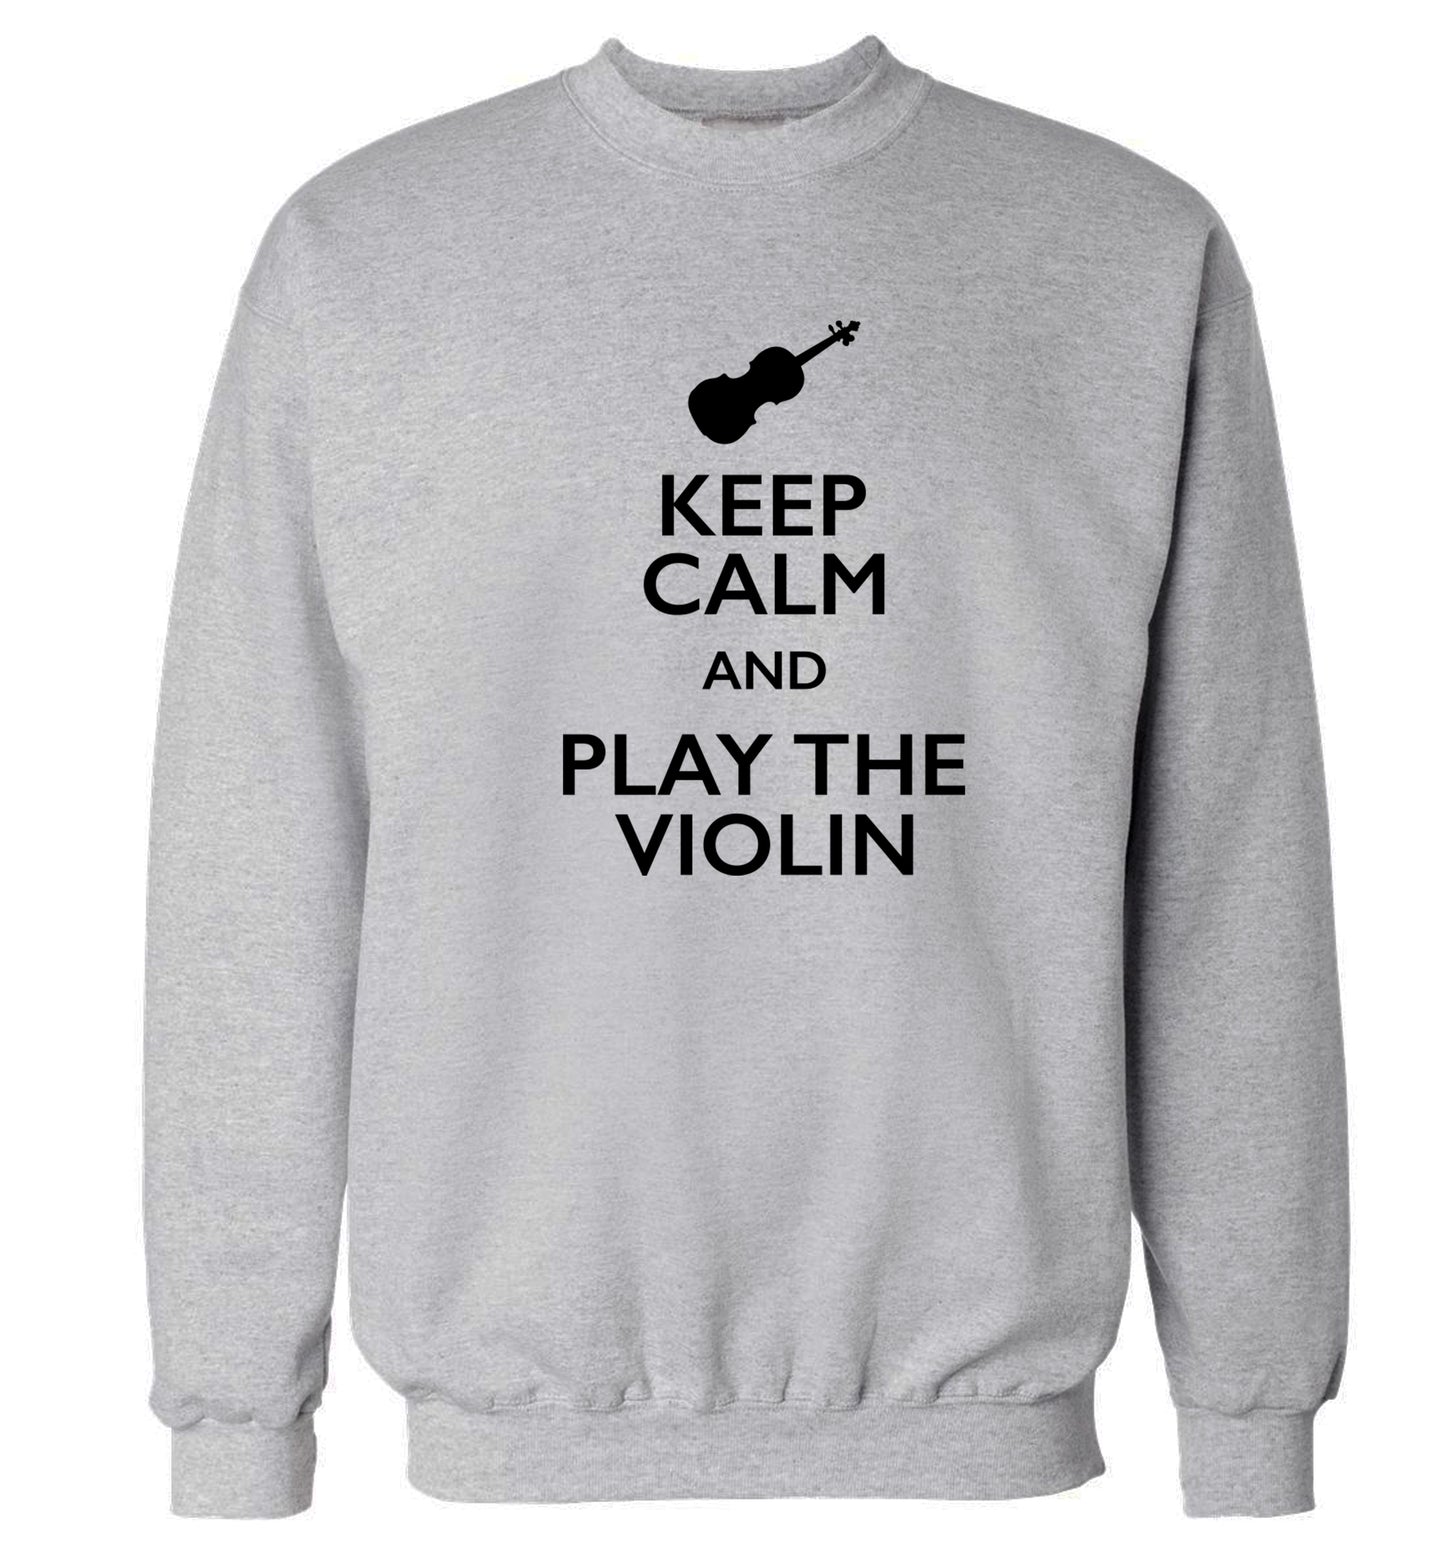 Keep calm and play the violin Adult's unisex grey Sweater 2XL